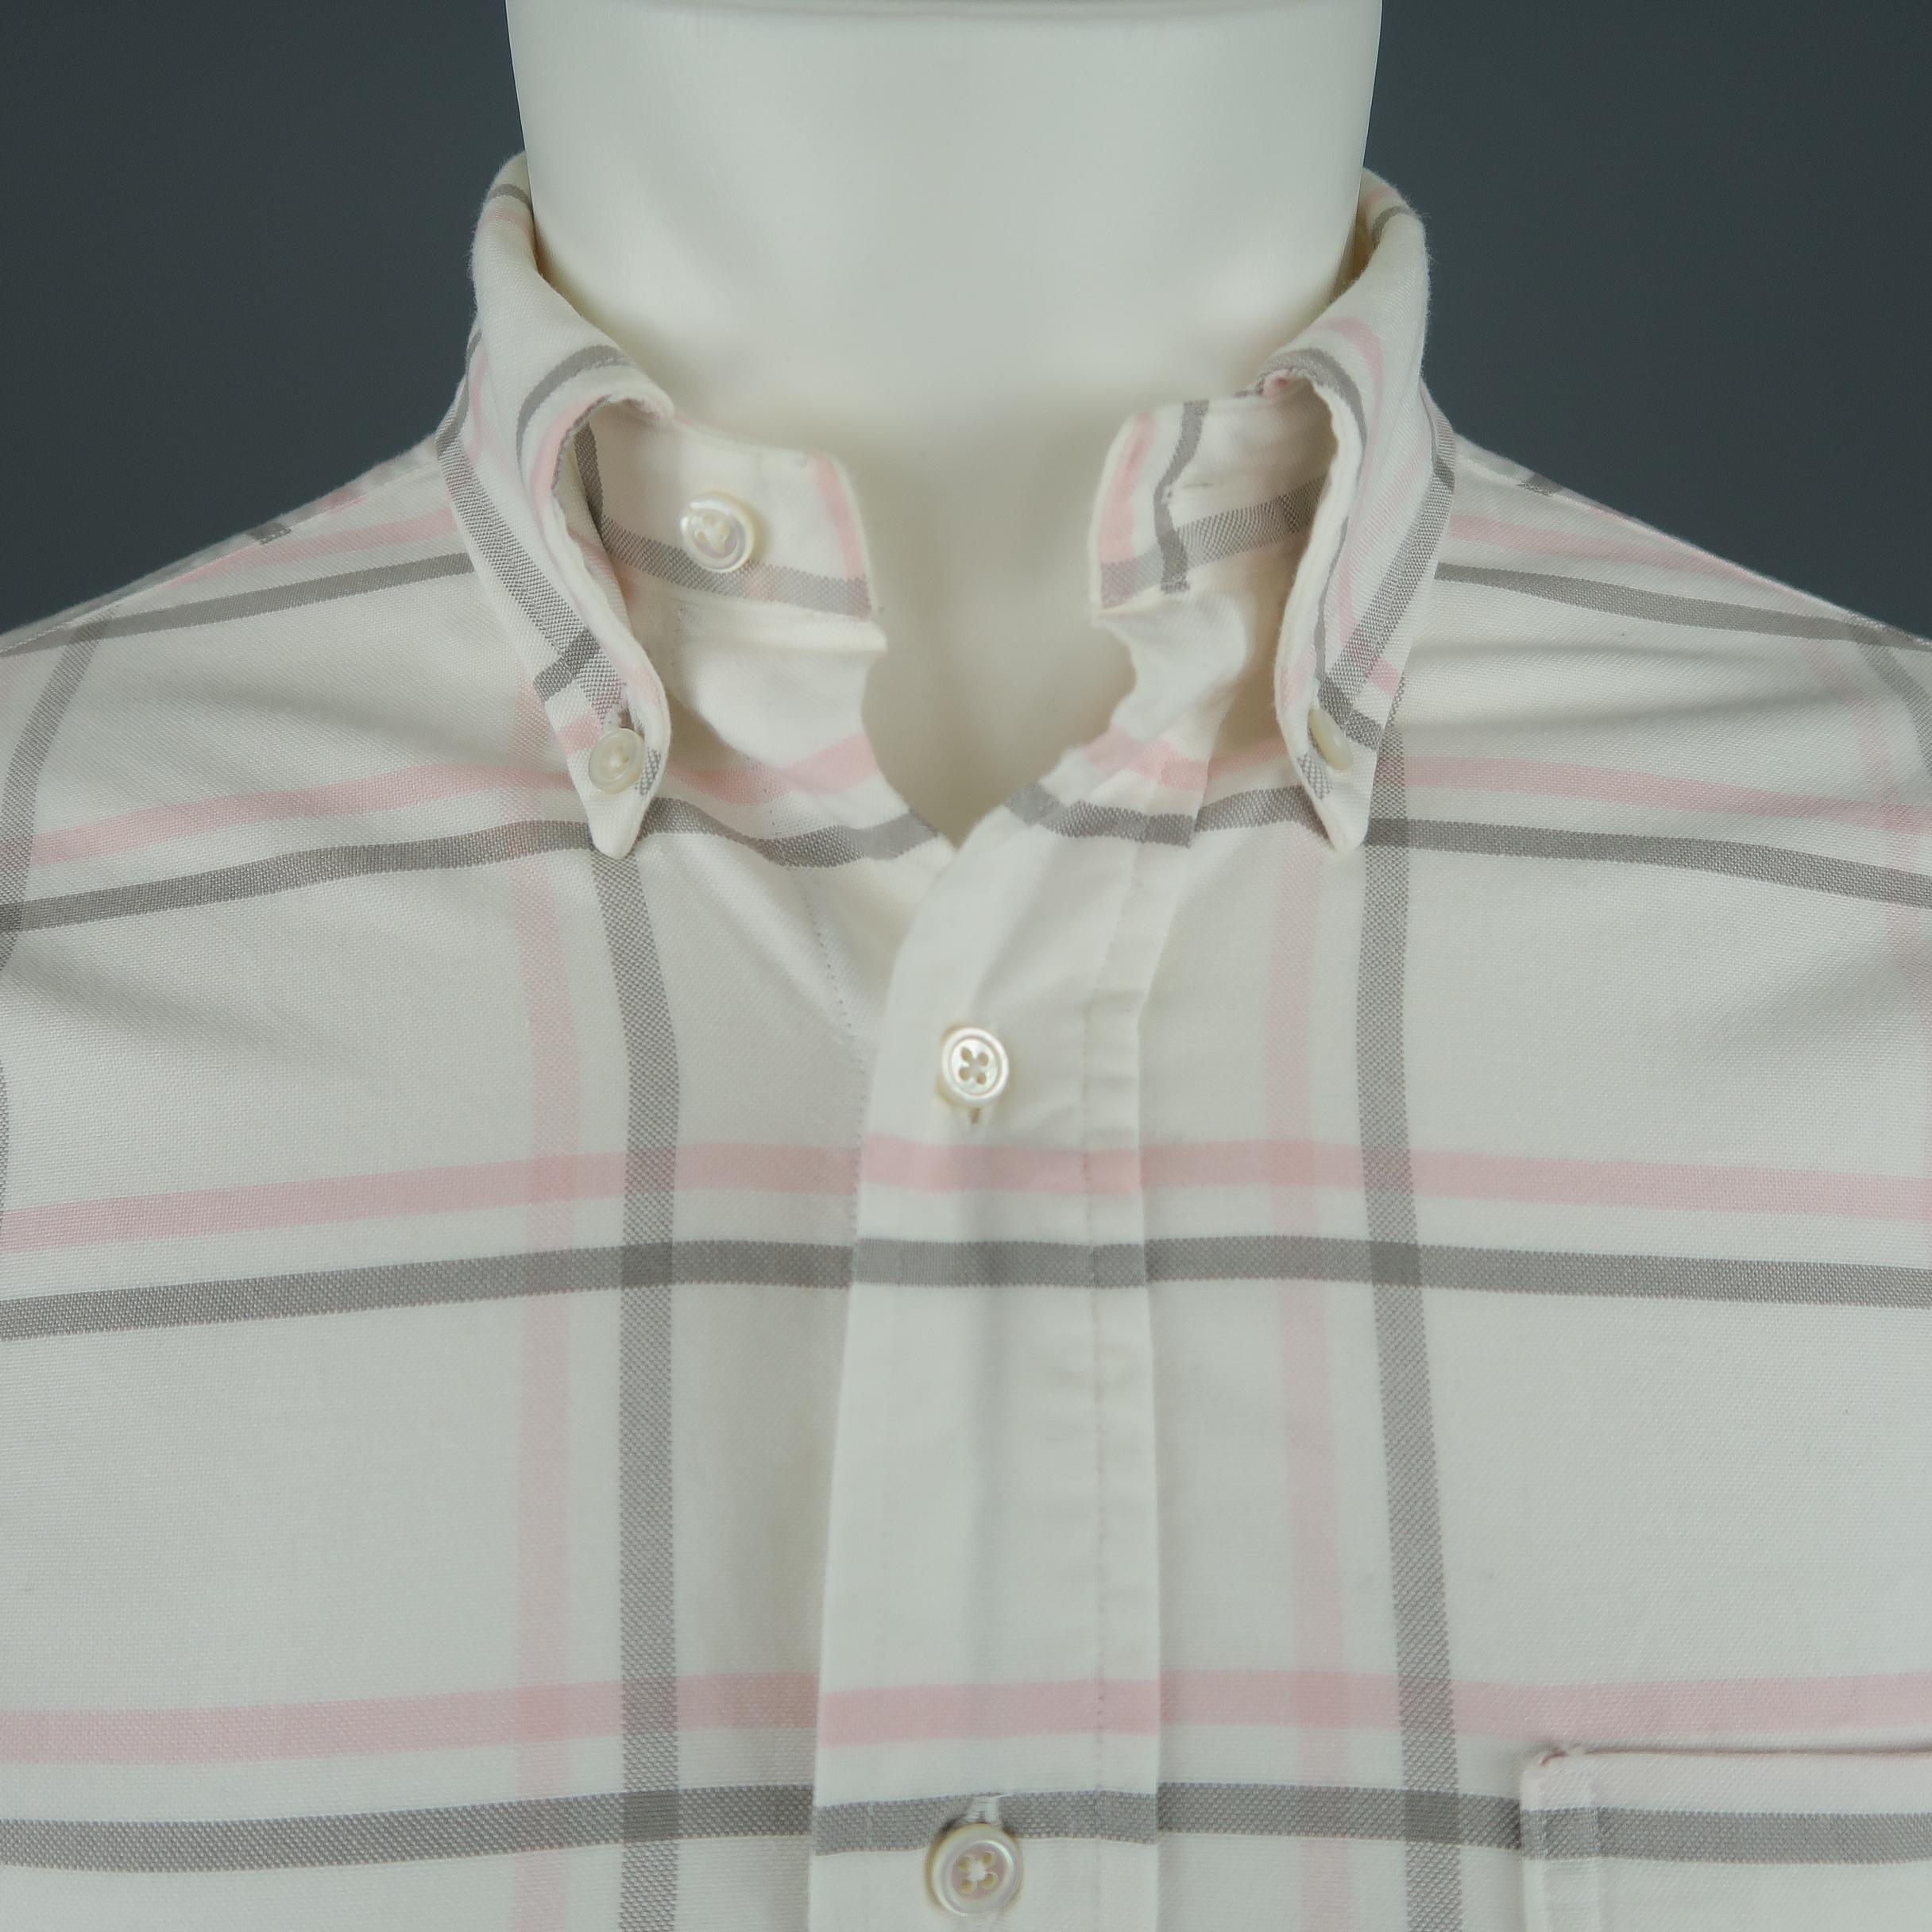 BLACK FLEECE shirt comes in off white cotton with brown and pink plaid pattern throughout, button down collar, curved hem, and patch pocket. Made in USA. Retail price $225,00. 
 
Excellent Pre-Owned Condition.
Marked: BB0
 
Measurements:
 
Shoulder: